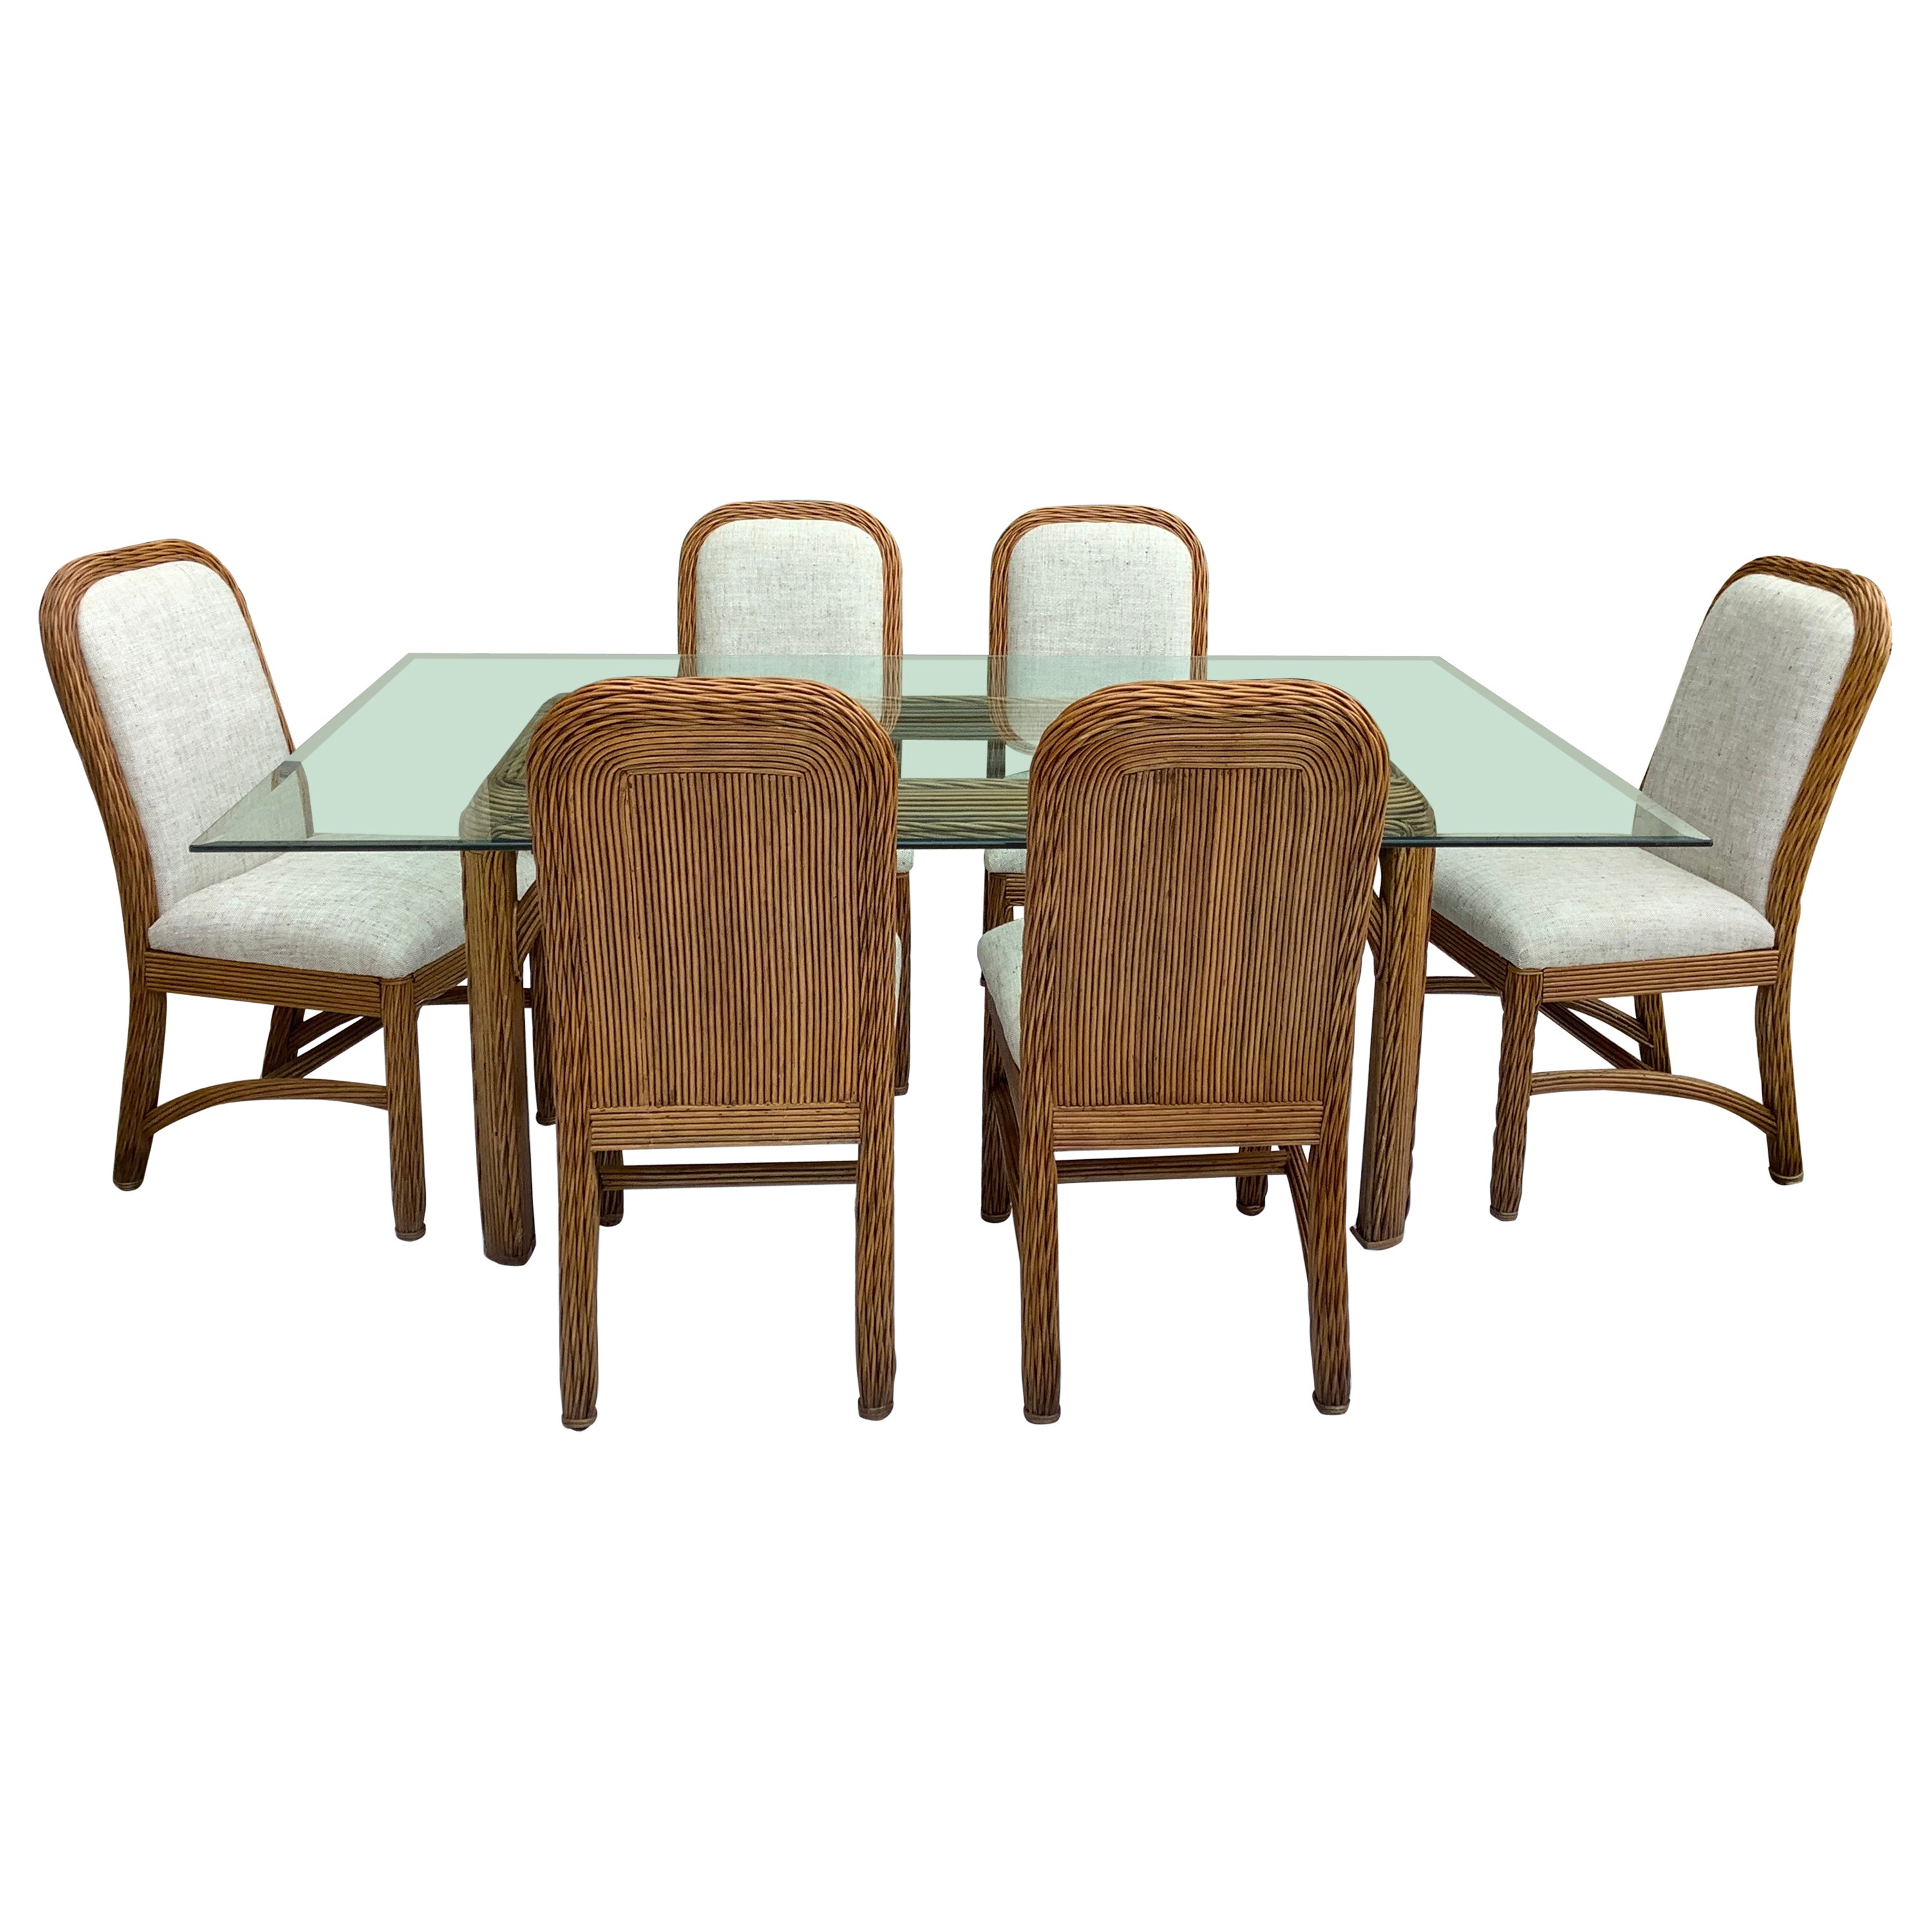 Woven Reed Dining Table w/ 8 Chairs, Crespi Style For Sale